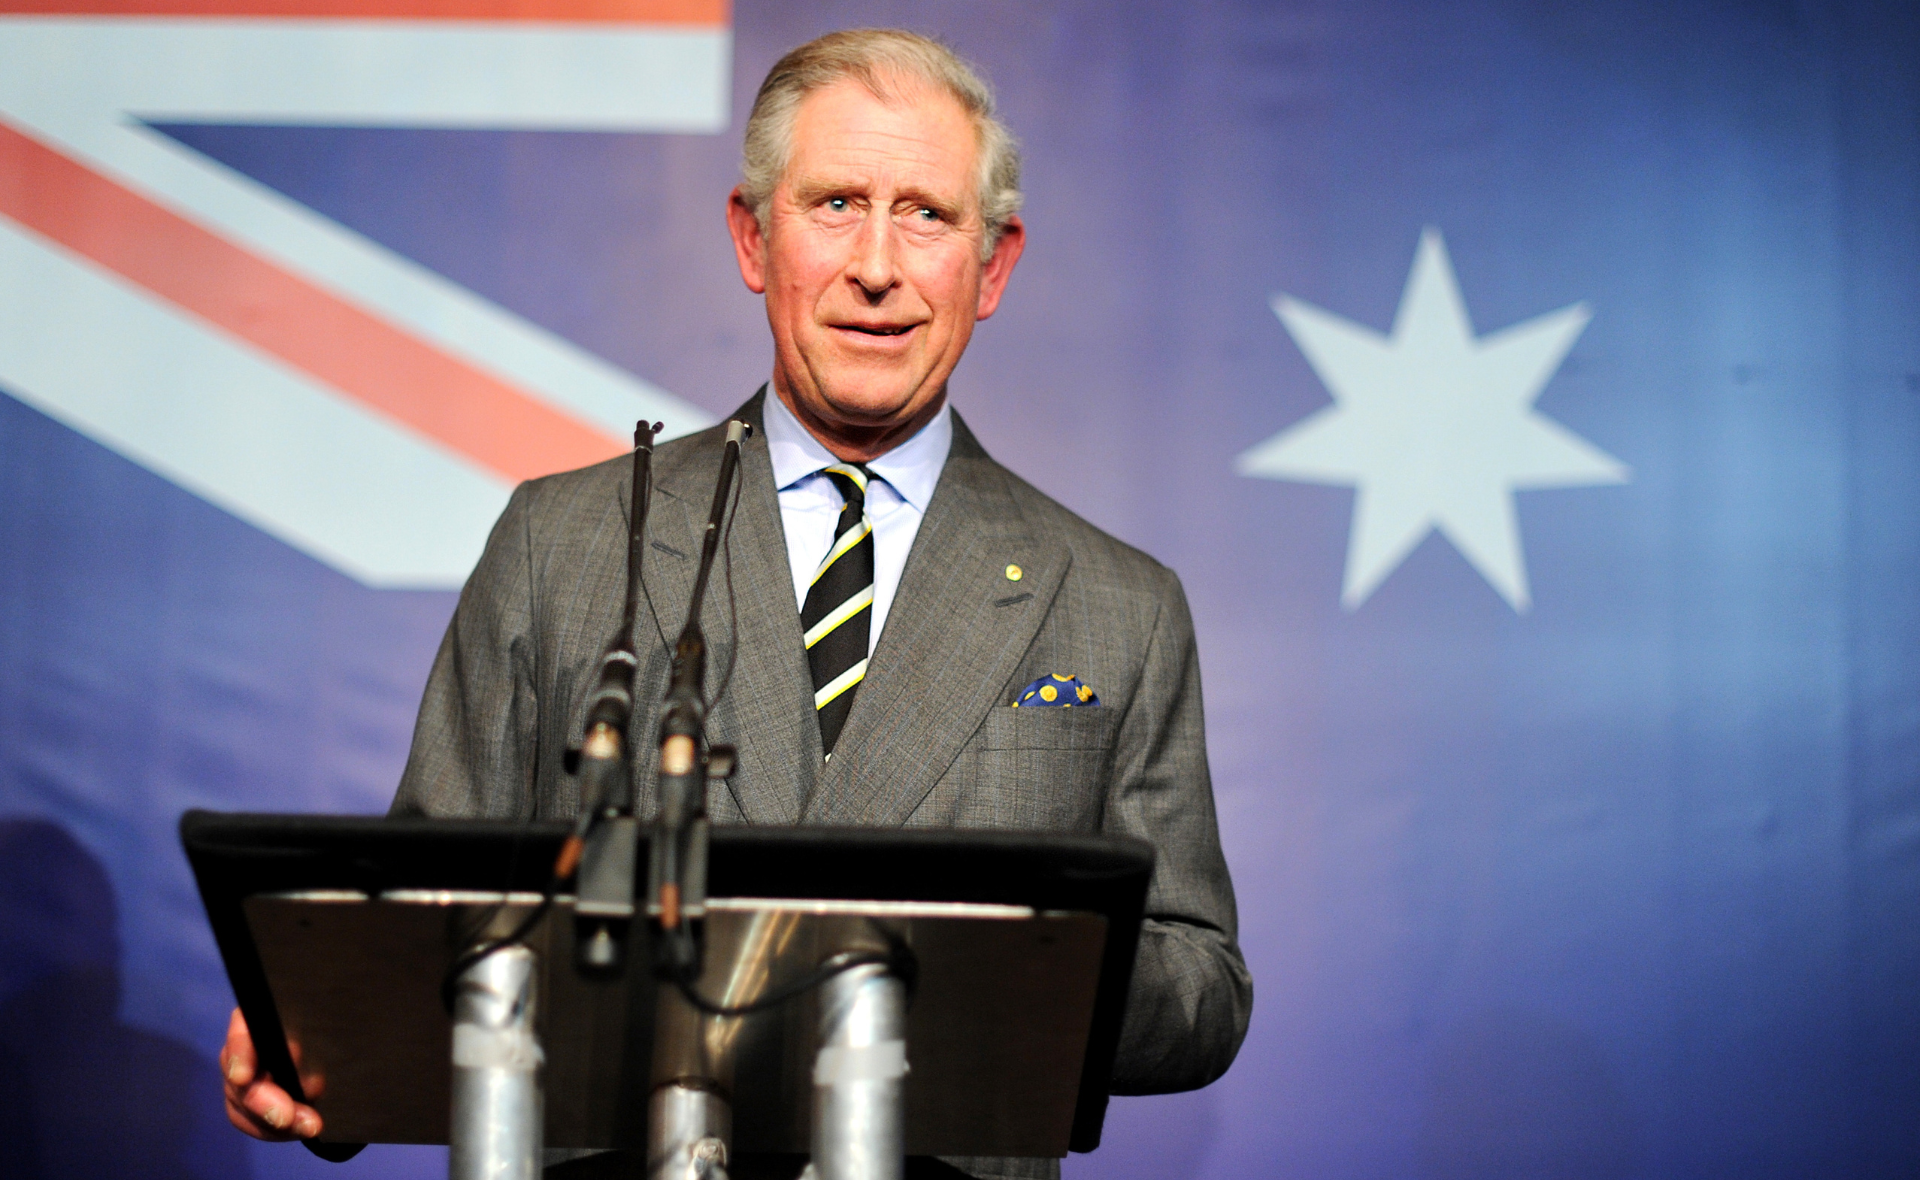 PM Anthony Albanese formally invites King Charles to Australia after alleged royal snub